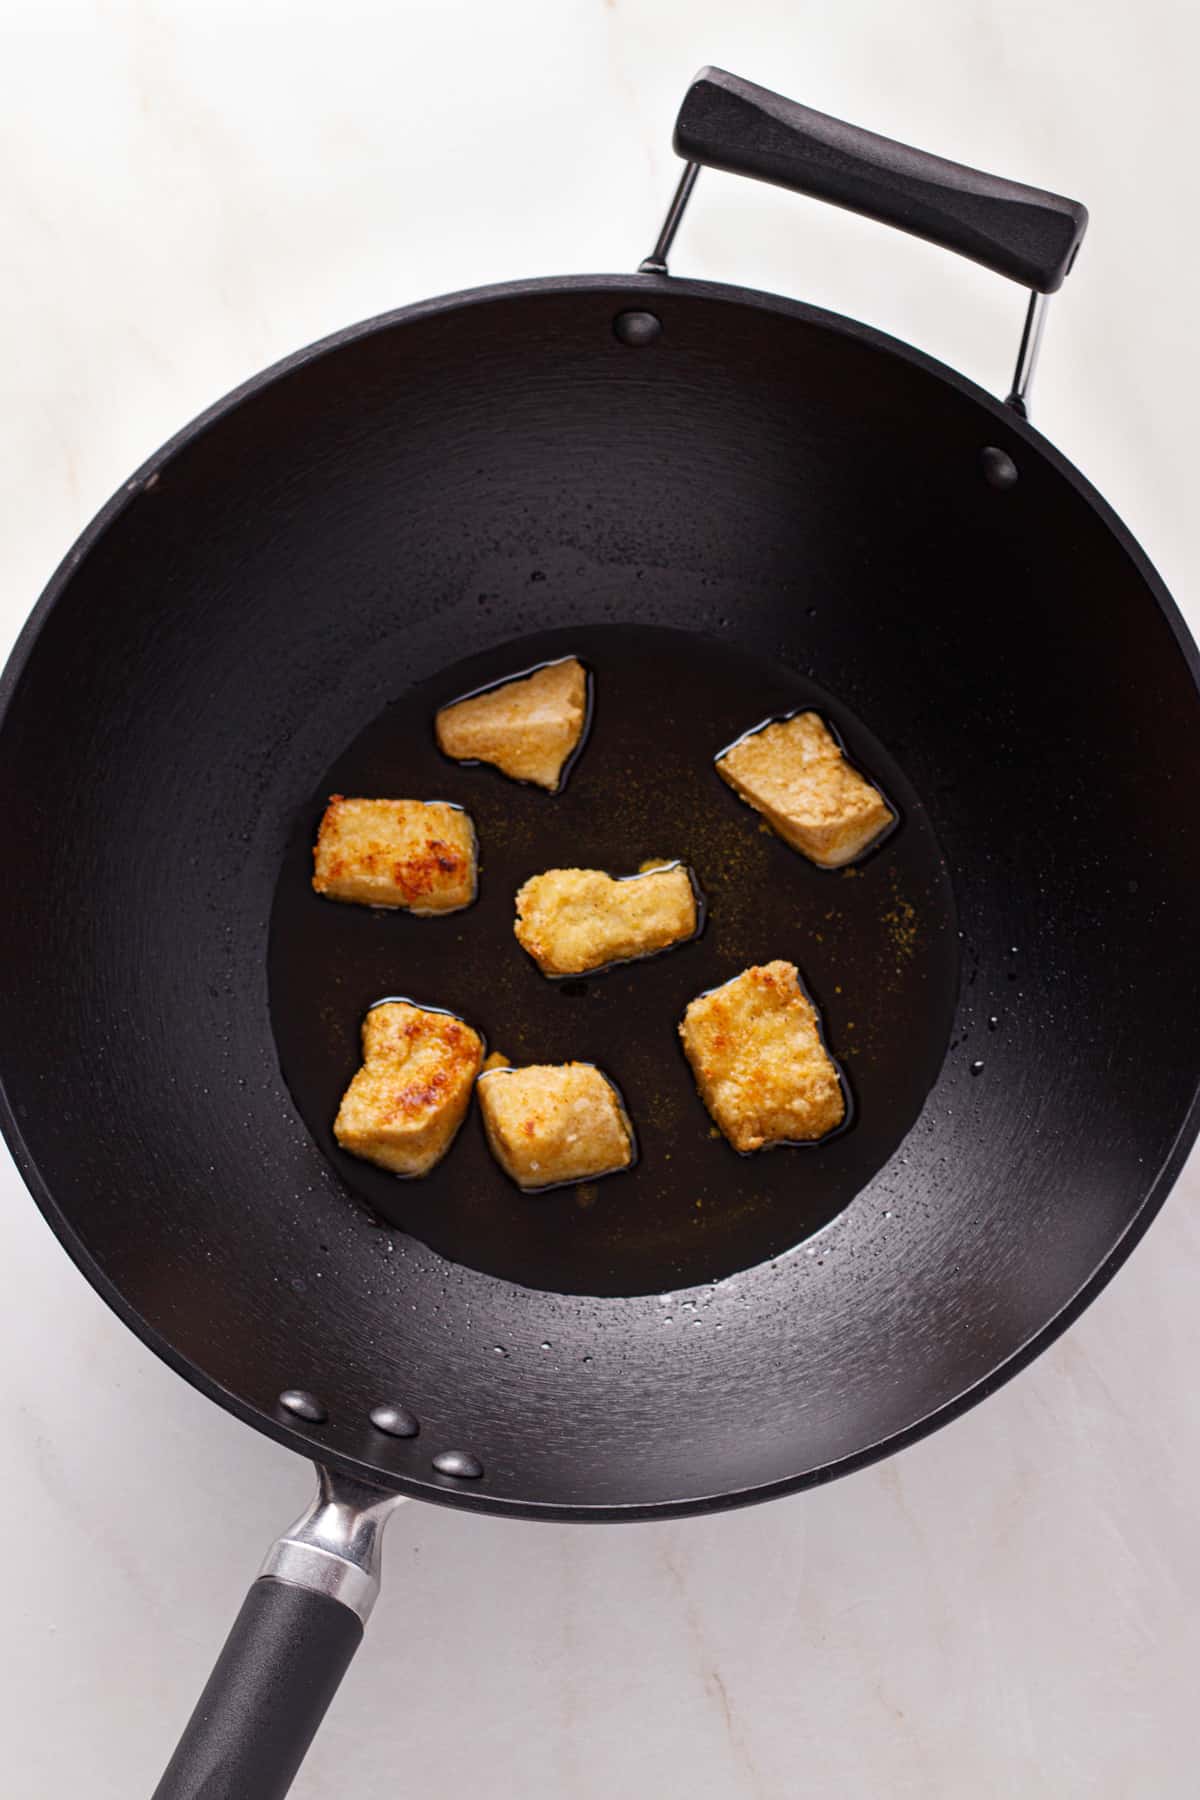 Tofu being shallow fried in olive oil.